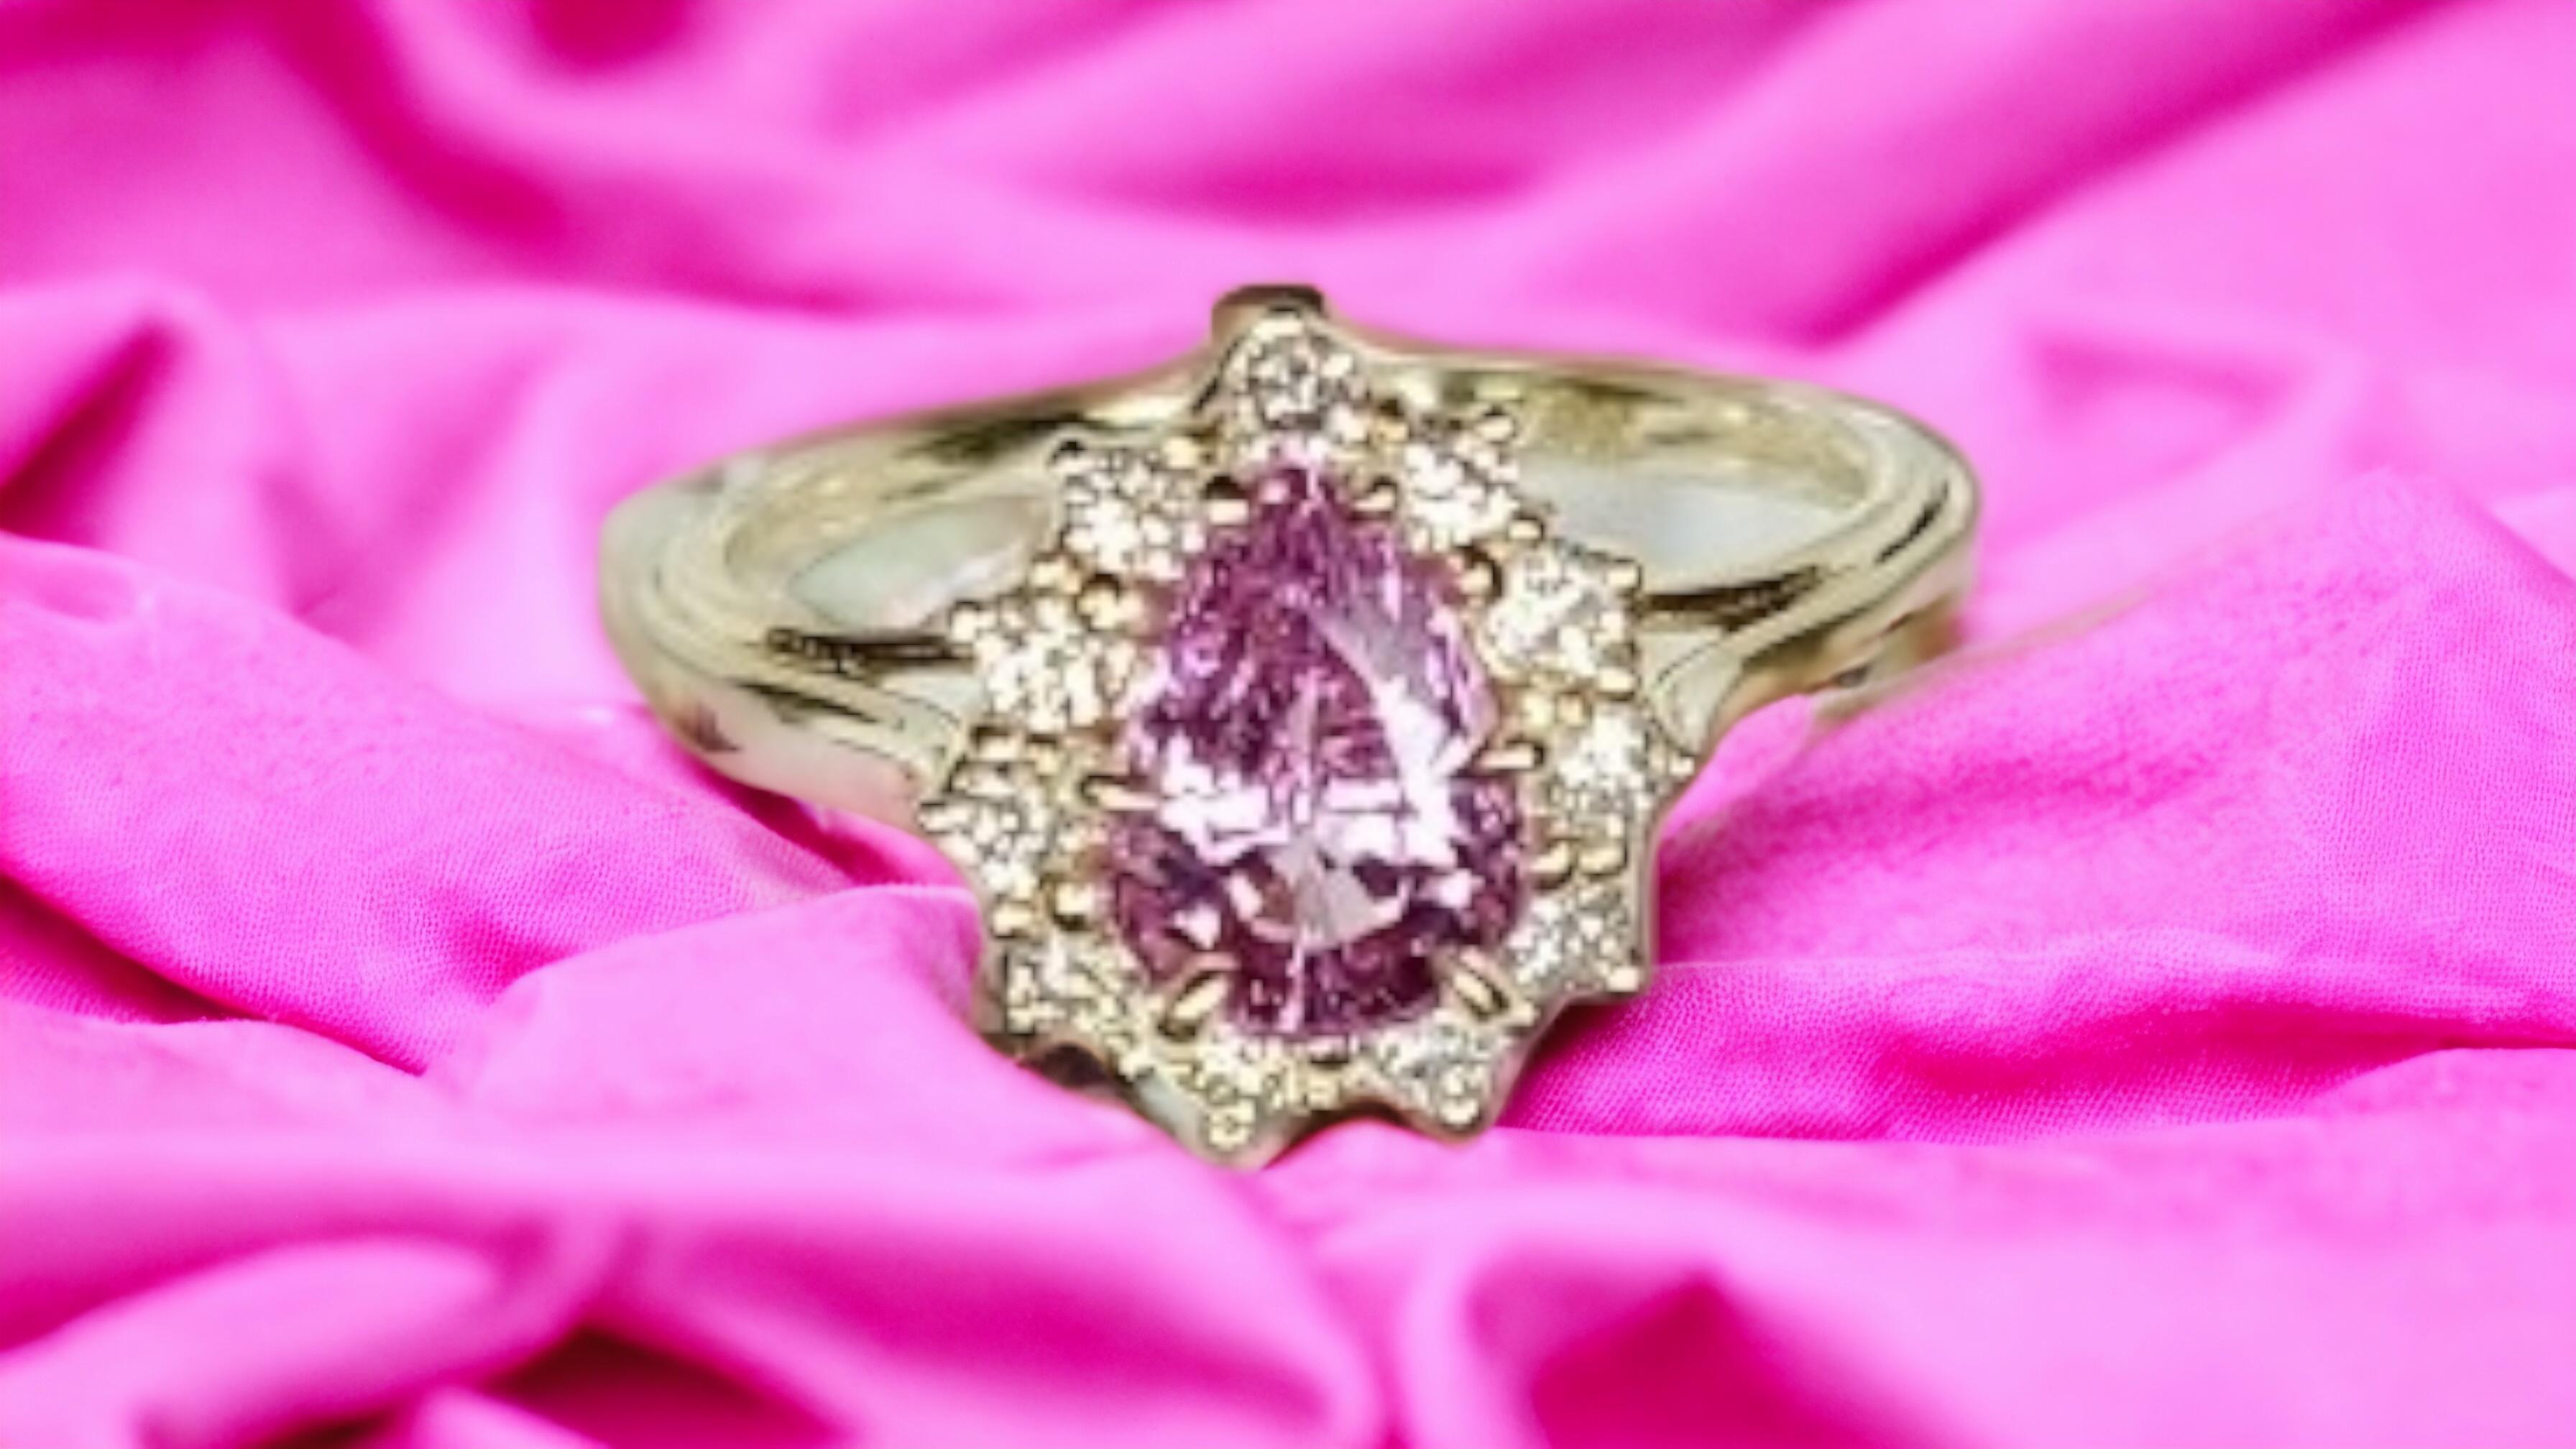 New Cert 1.37 ct Unheated Natural Pink Sapphire Diamond Ring in 14k Gold In New Condition For Sale In Warren, NJ